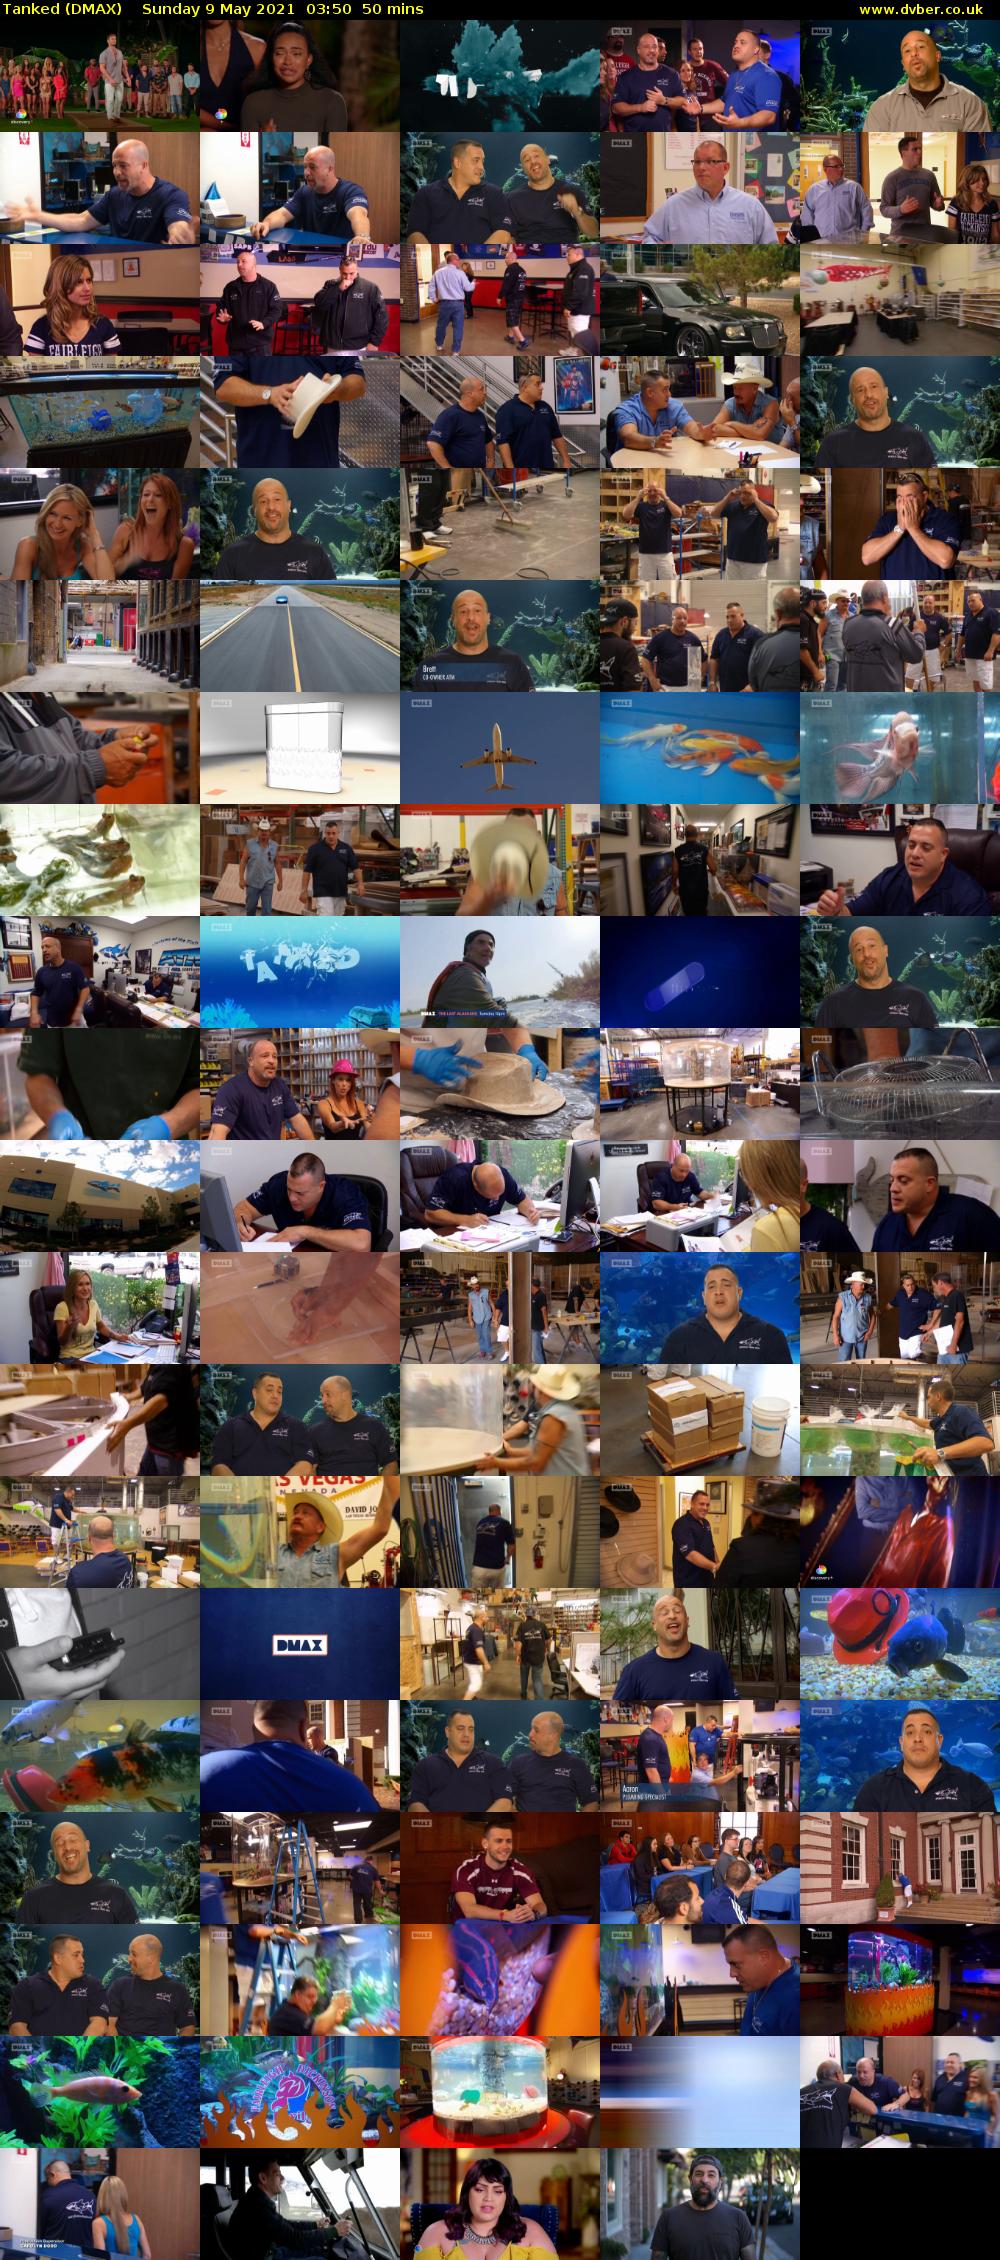 Tanked (DMAX) Sunday 9 May 2021 03:50 - 04:40